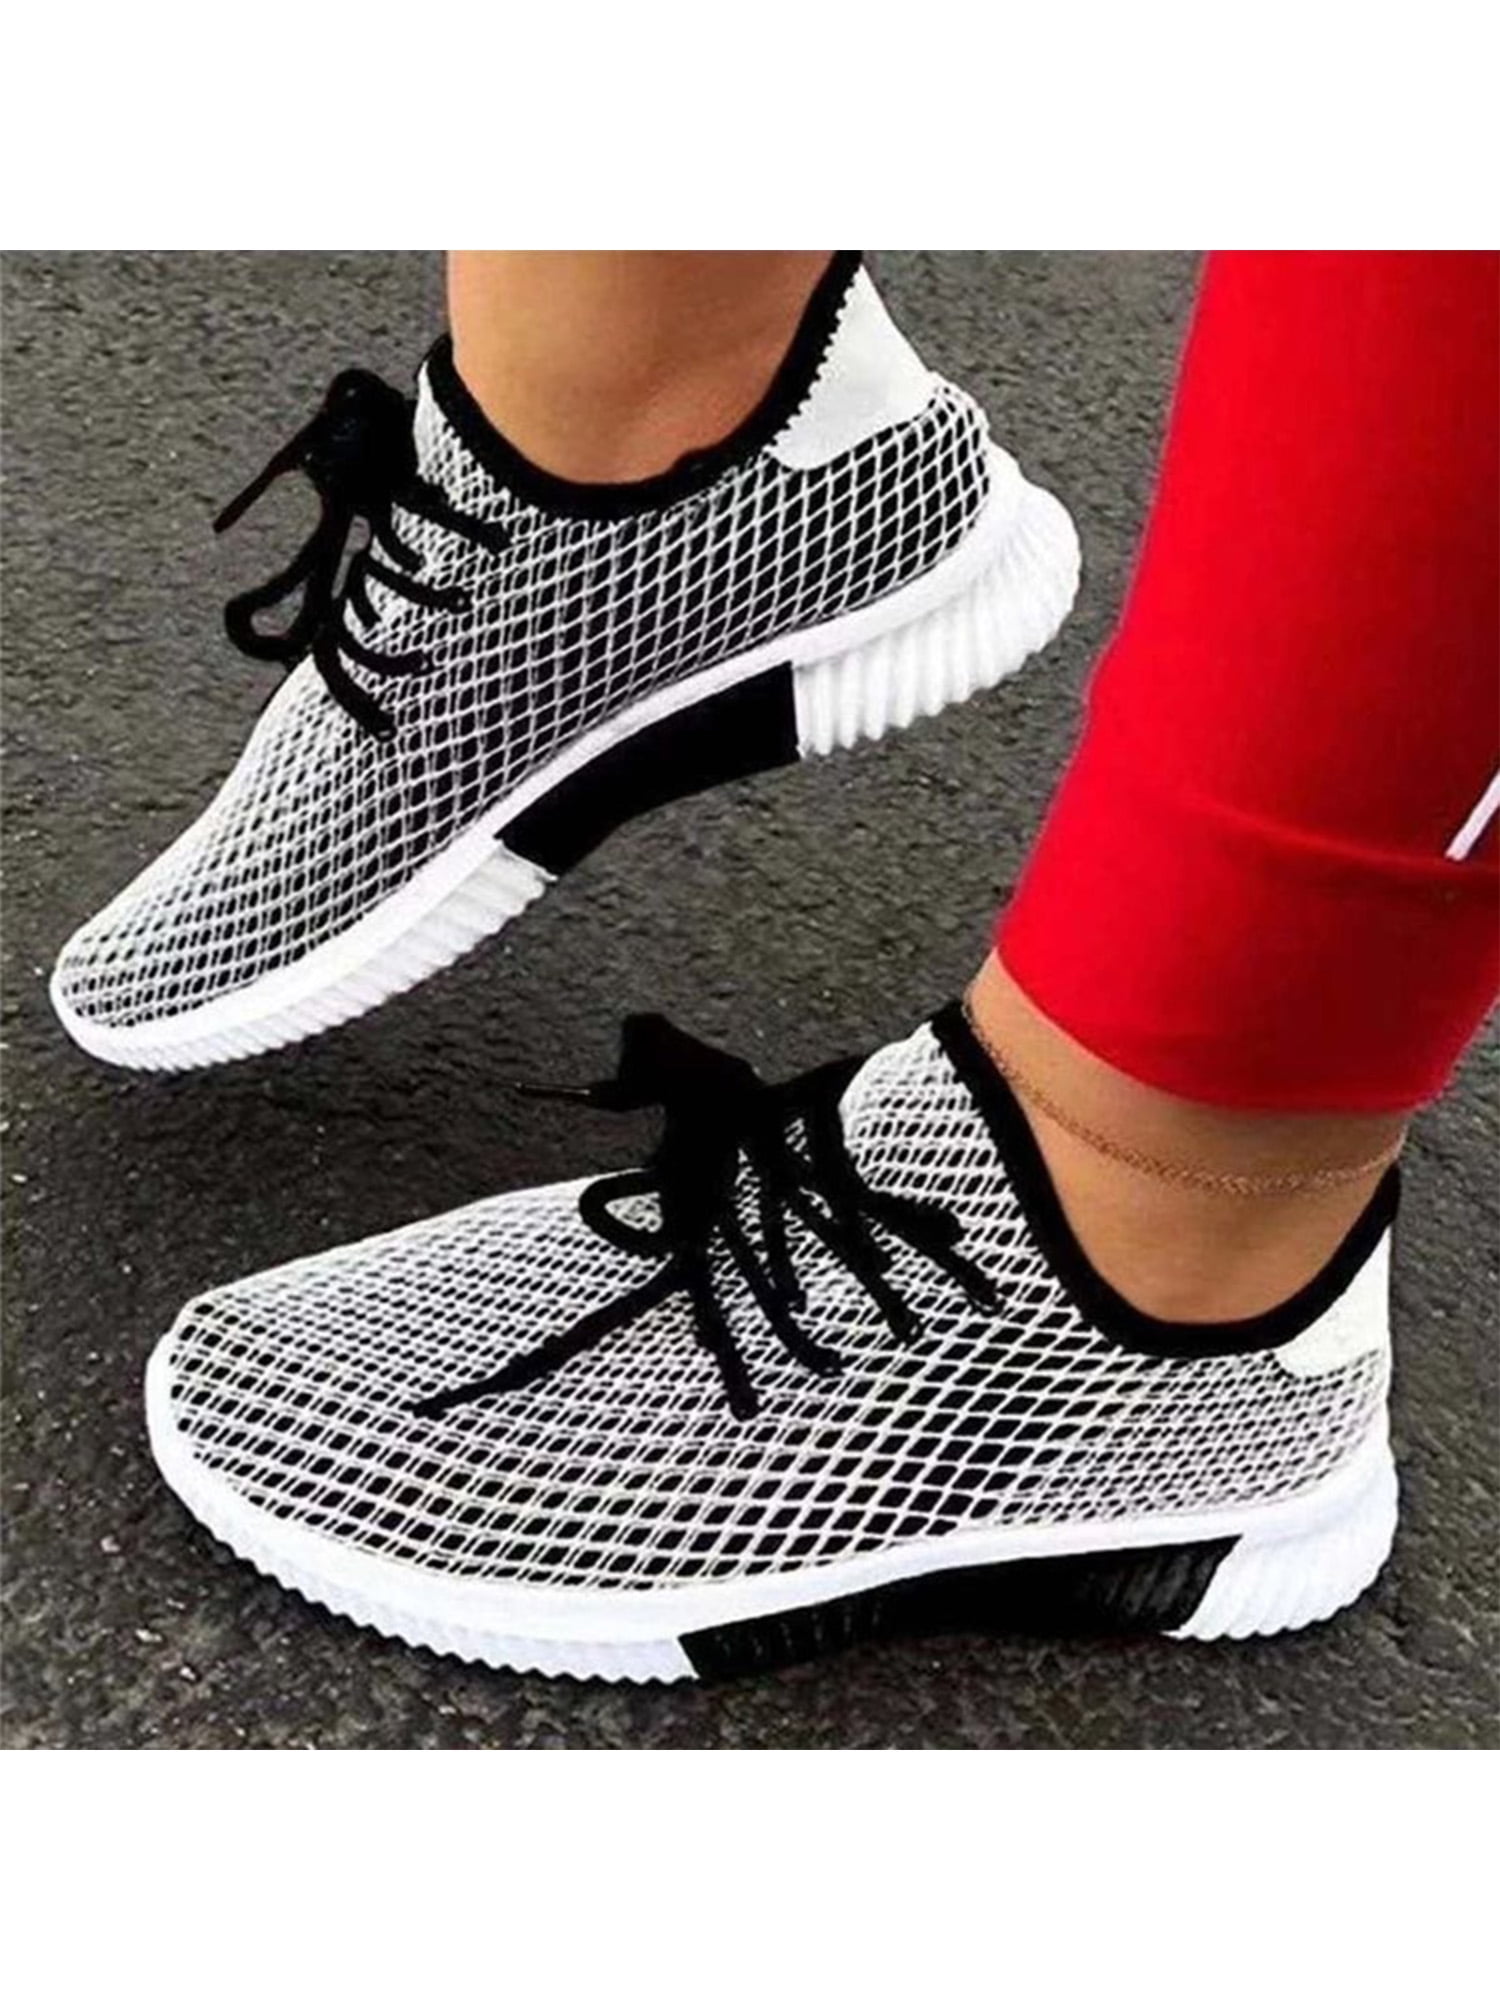 Sneakers Shoes Training Running Womens Fitness Casual Walking Athletic 